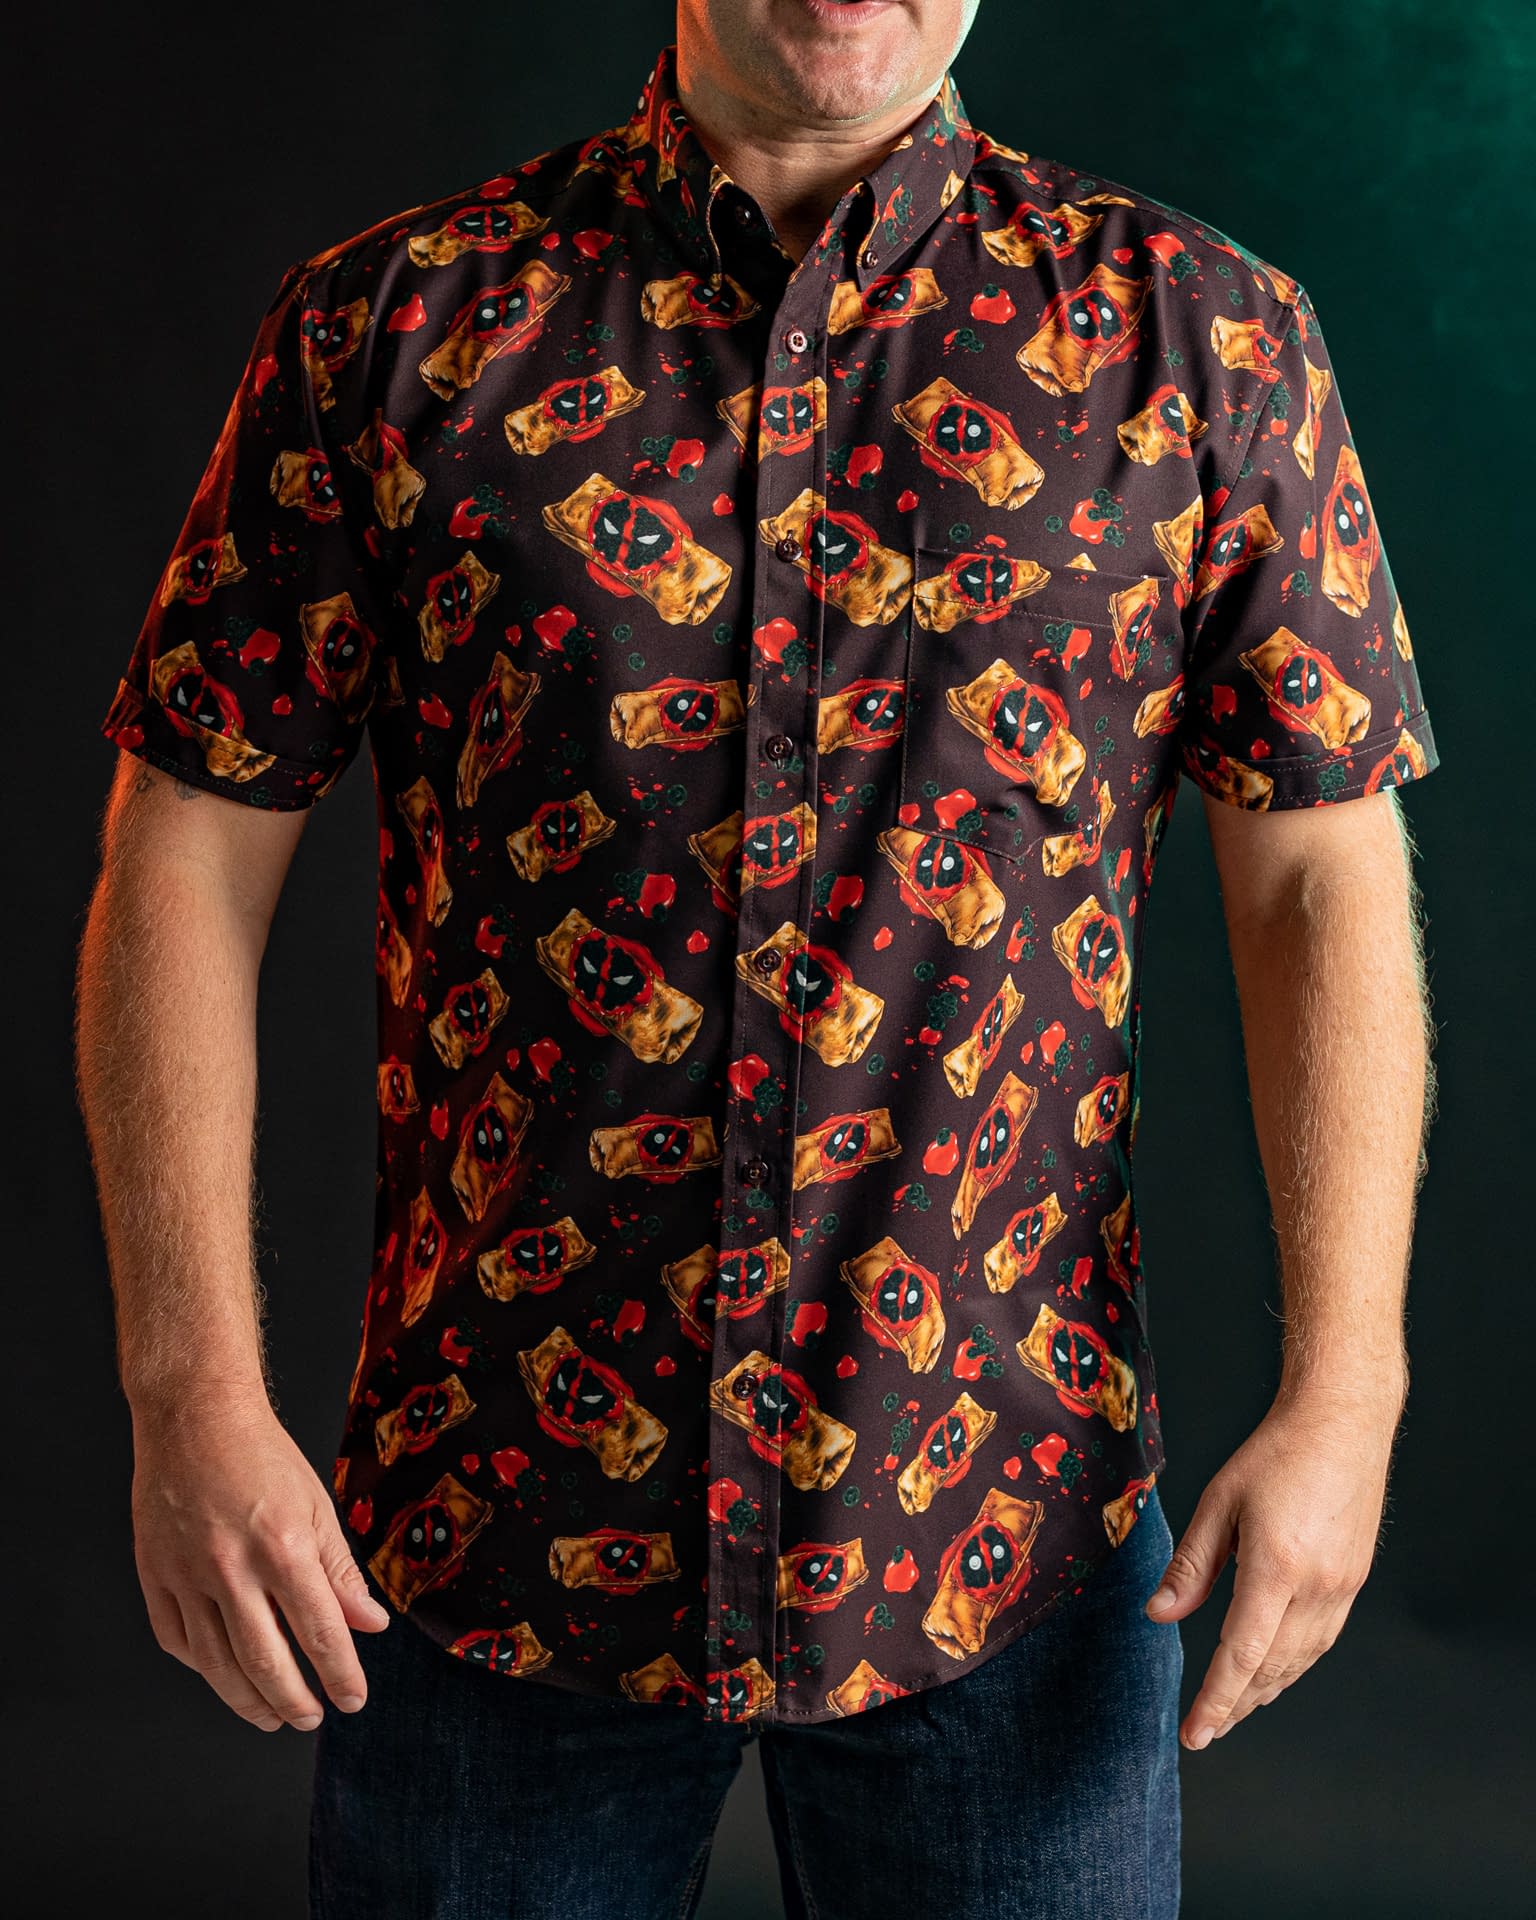 RSVLTS Debuts Delicious New and Exclusive Button-Downs for D23